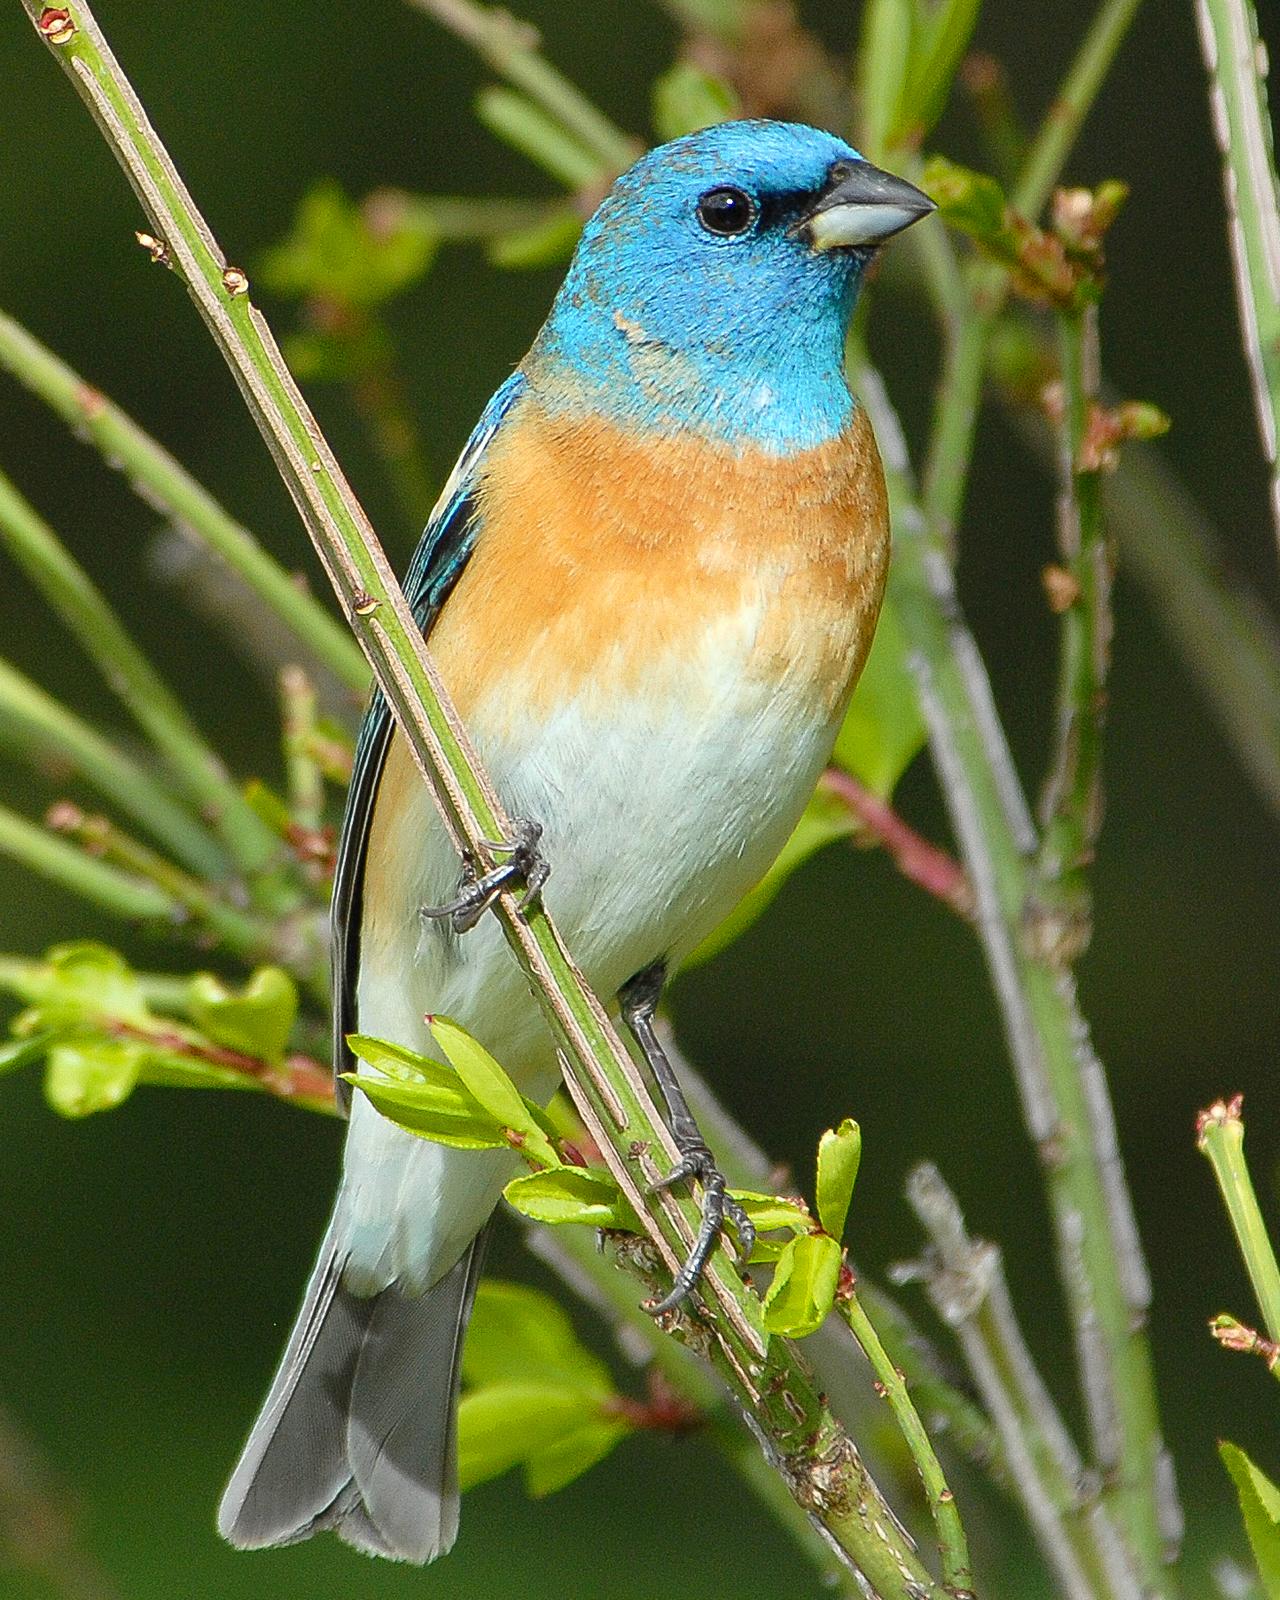 Lazuli Bunting Photo by Mike Fish